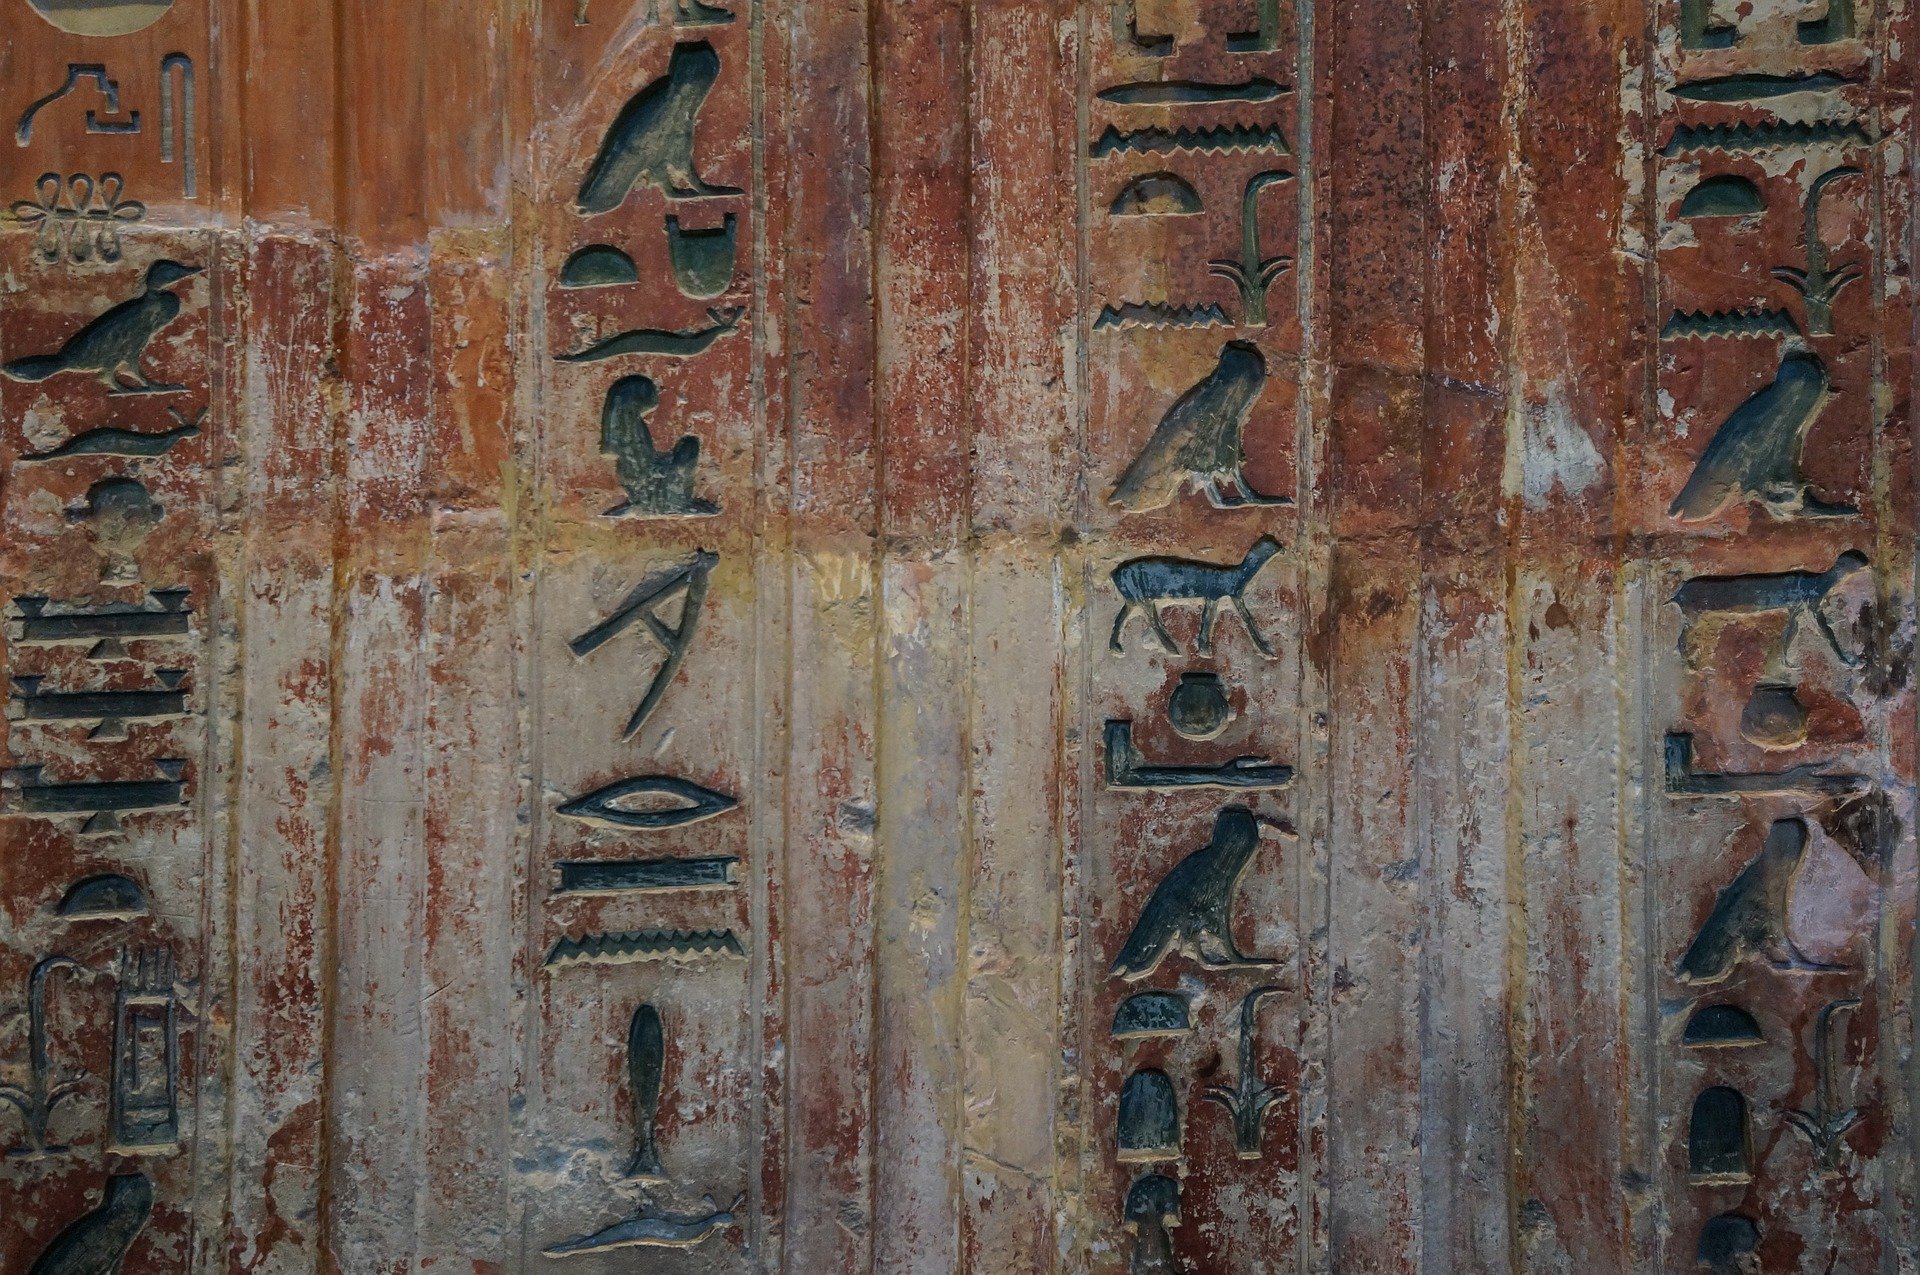 ancient Egyptian markings